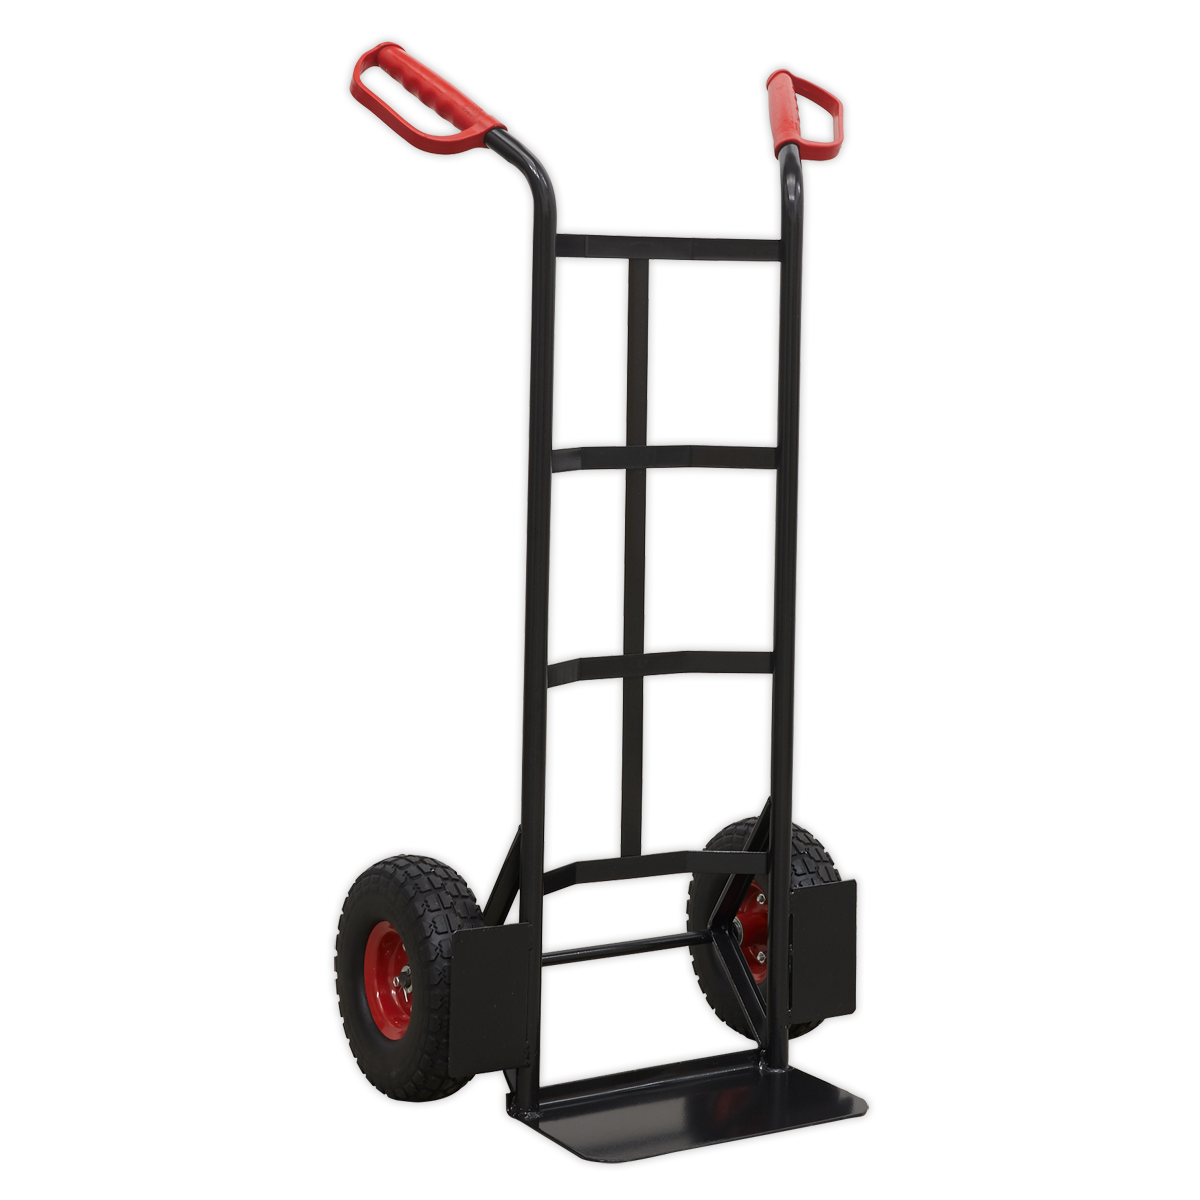 Sealey Heavy-Duty Sack Truck with PU Tyres 250kg Capacity CST986HD